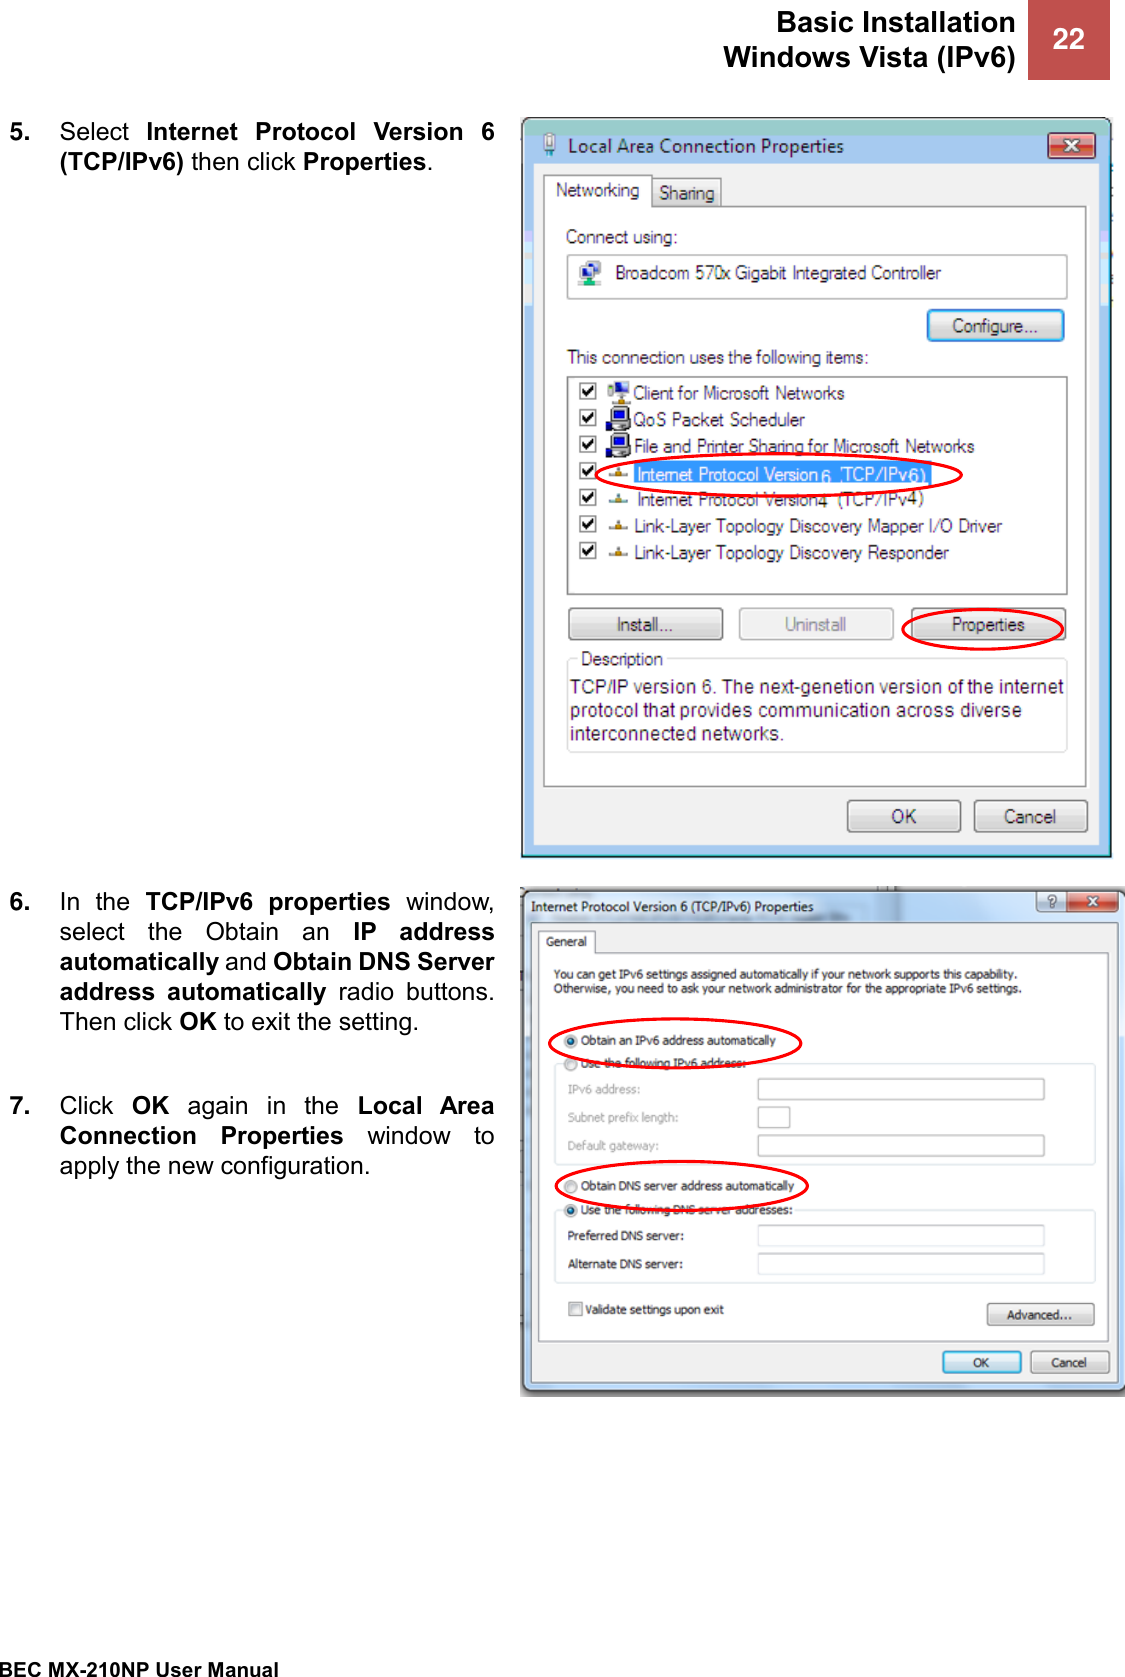 Basic Installation Windows Vista (IPv6) 22   BEC MX-210NP User Manual  5. Select  Internet  Protocol  Version  6 (TCP/IPv6) then click Properties.  6. In  the  TCP/IPv6  properties  window, select  the  Obtain  an  IP  address automatically and Obtain DNS Server address  automatically  radio  buttons. Then click OK to exit the setting.  7. Click  OK  again  in  the  Local  Area Connection  Properties  window  to apply the new configuration.   